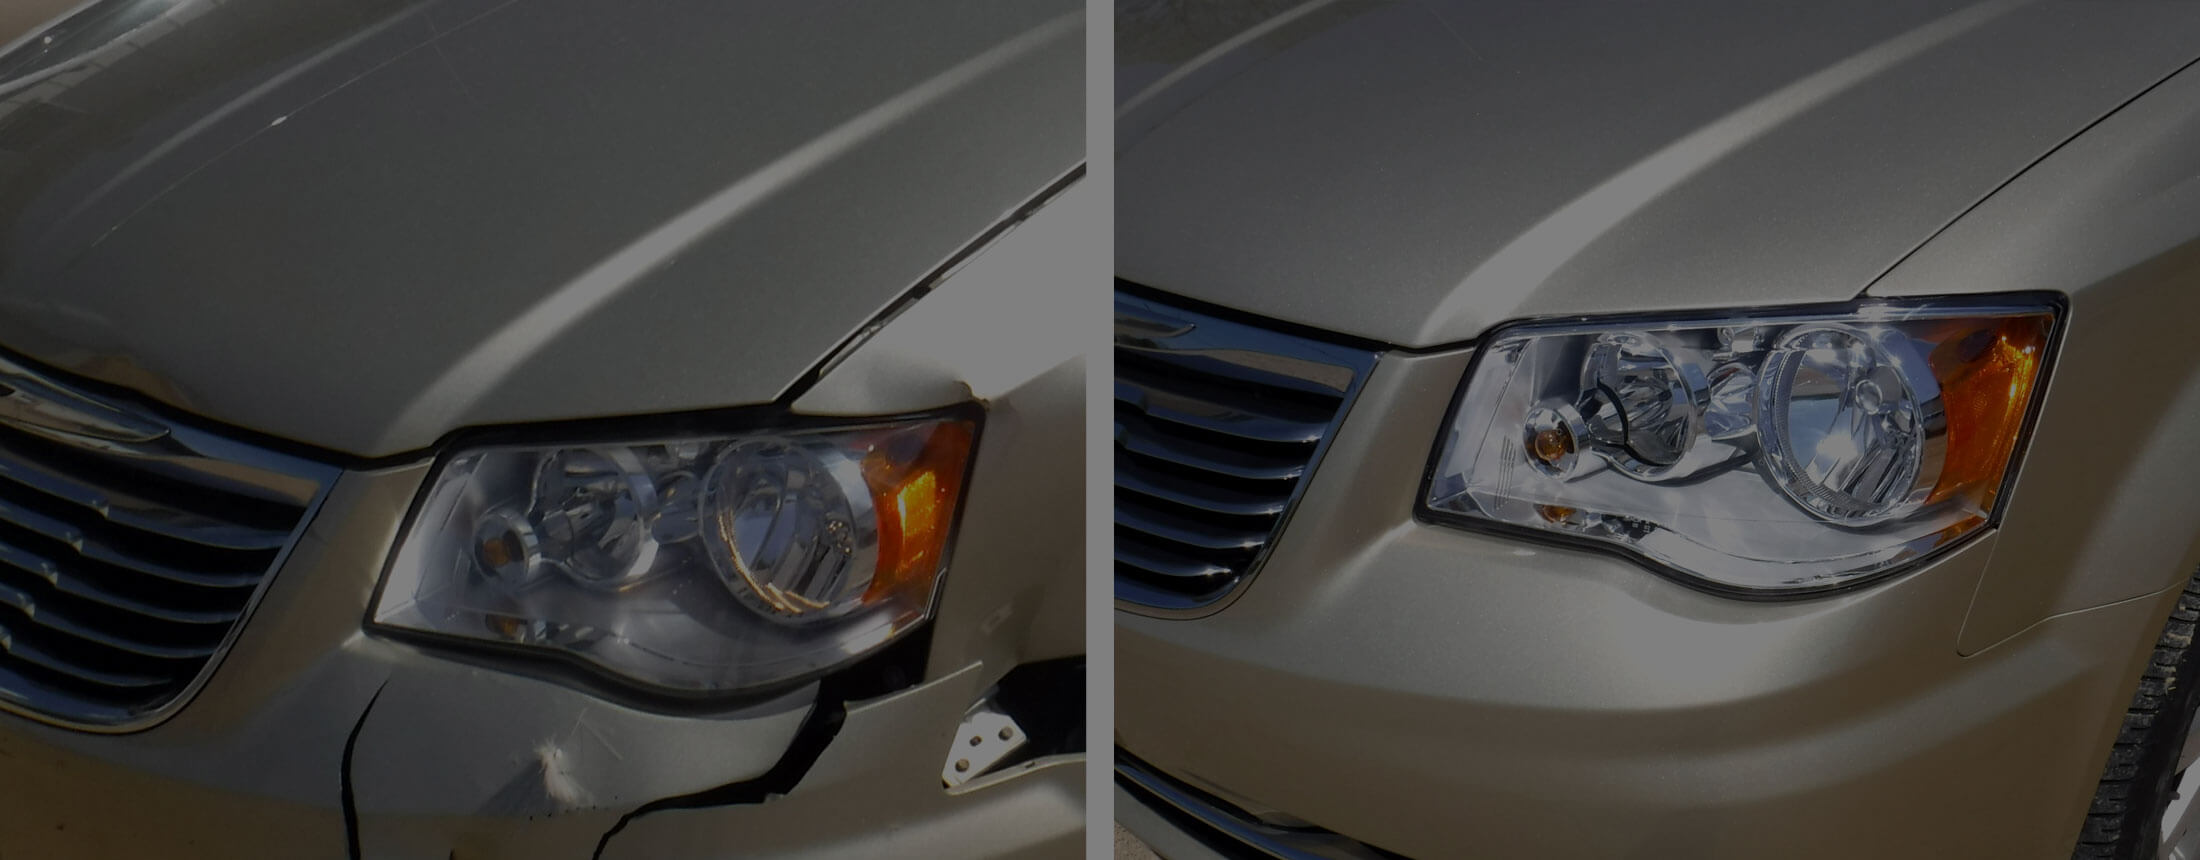 Before and after photos of a van with a damaged front bumper and headlight repaired by Wayne's Auto Body